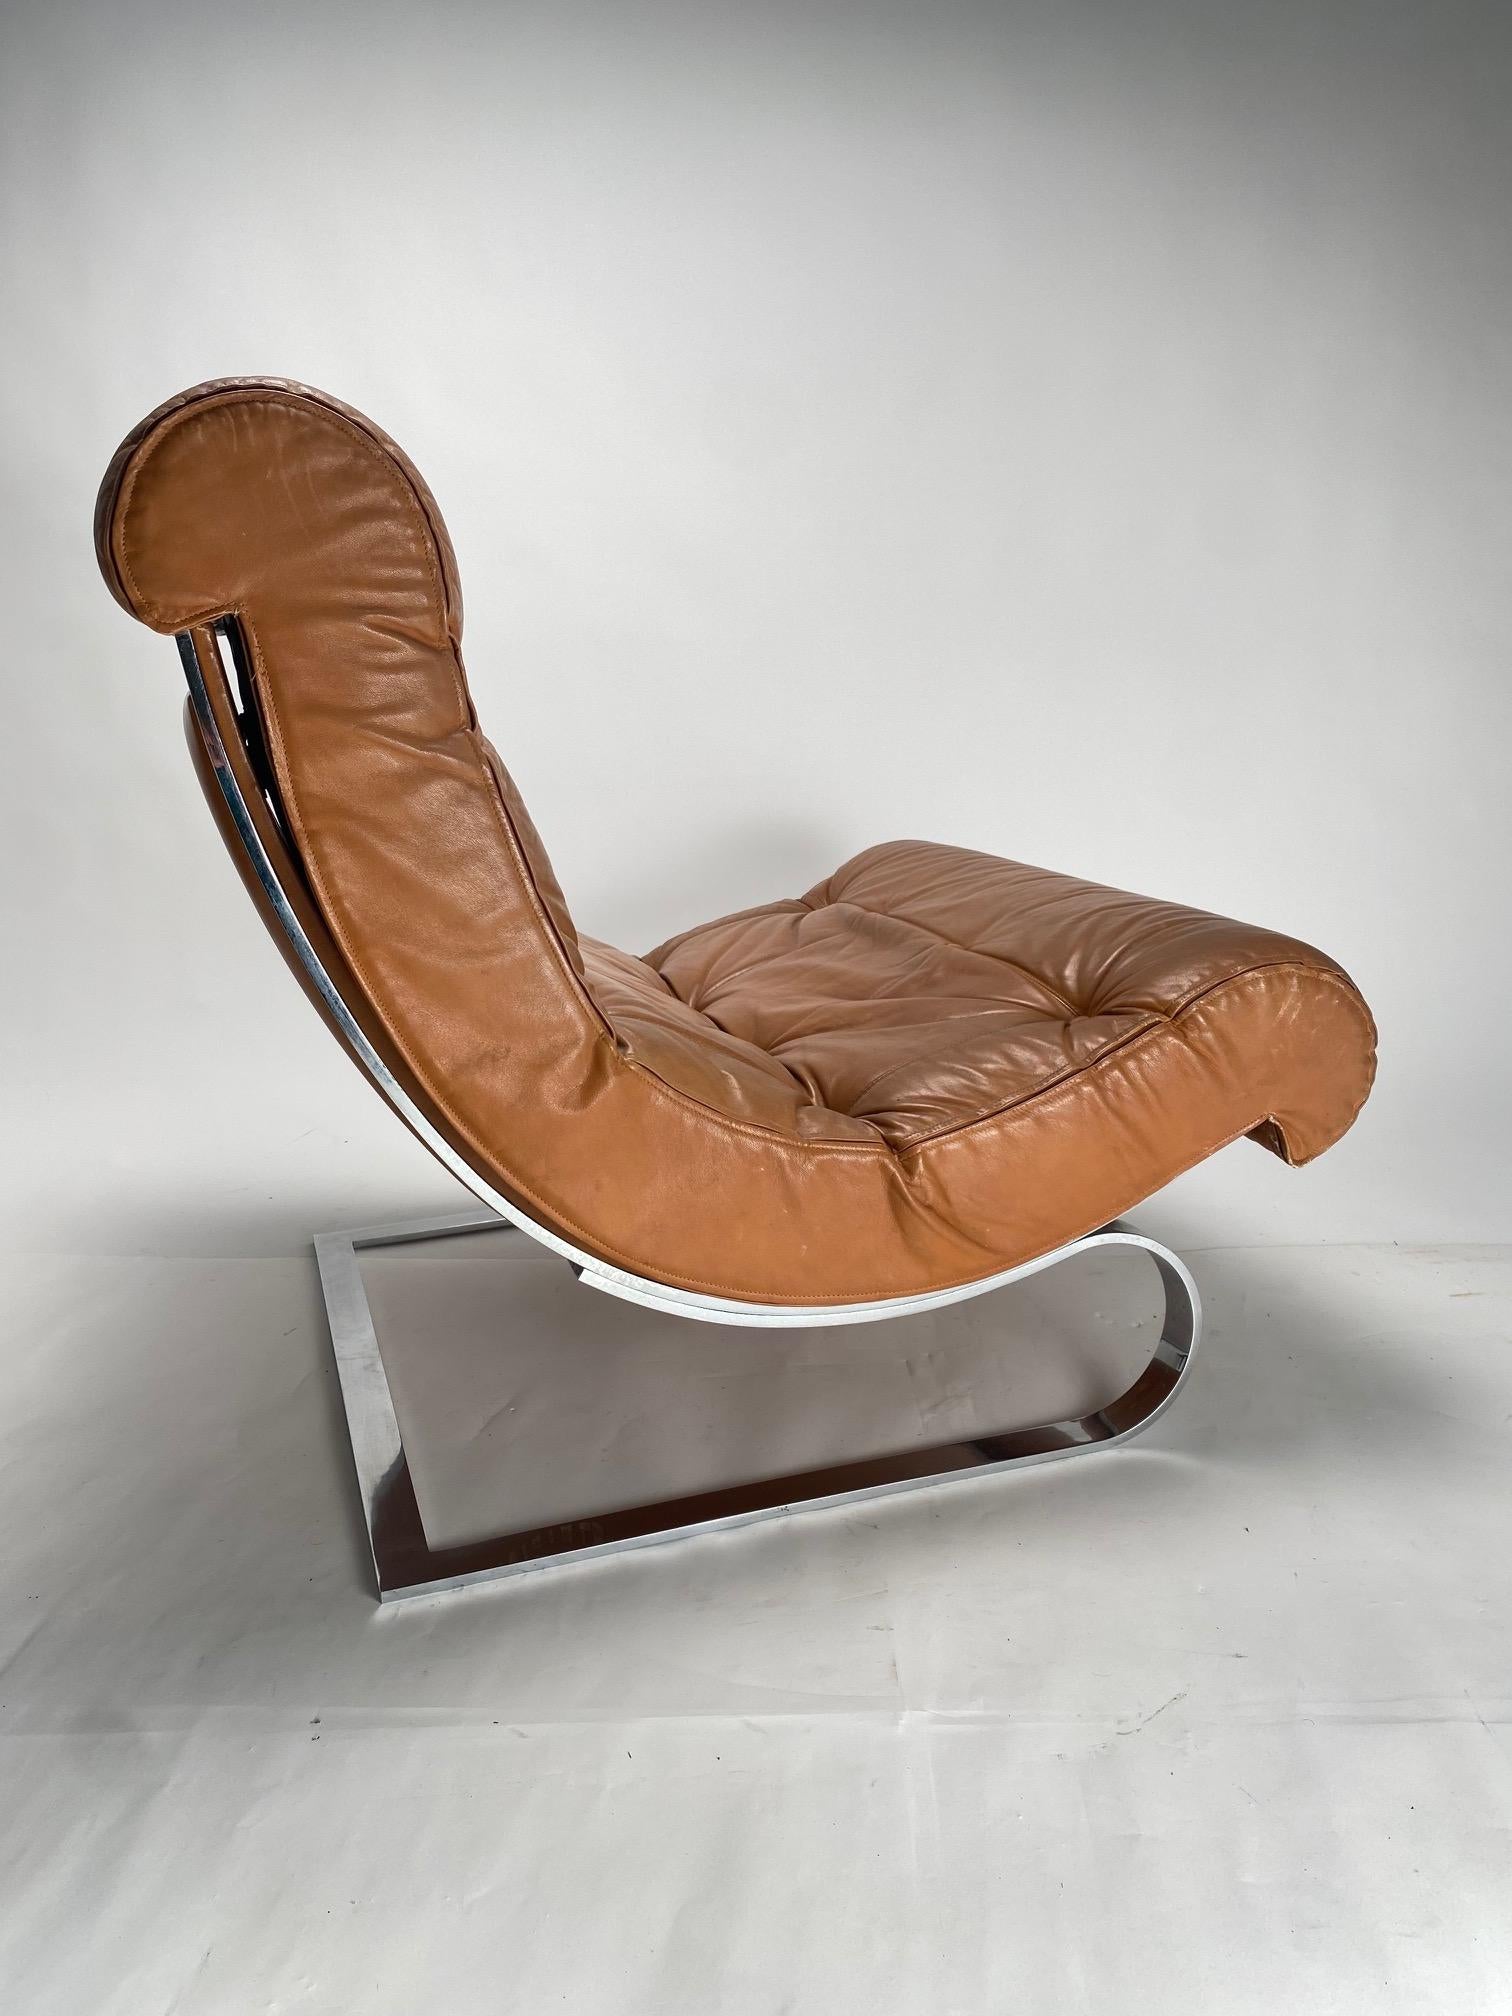 Metal Lounge Armchair by Renato Balestra for Cinova, Italy 1970s For Sale